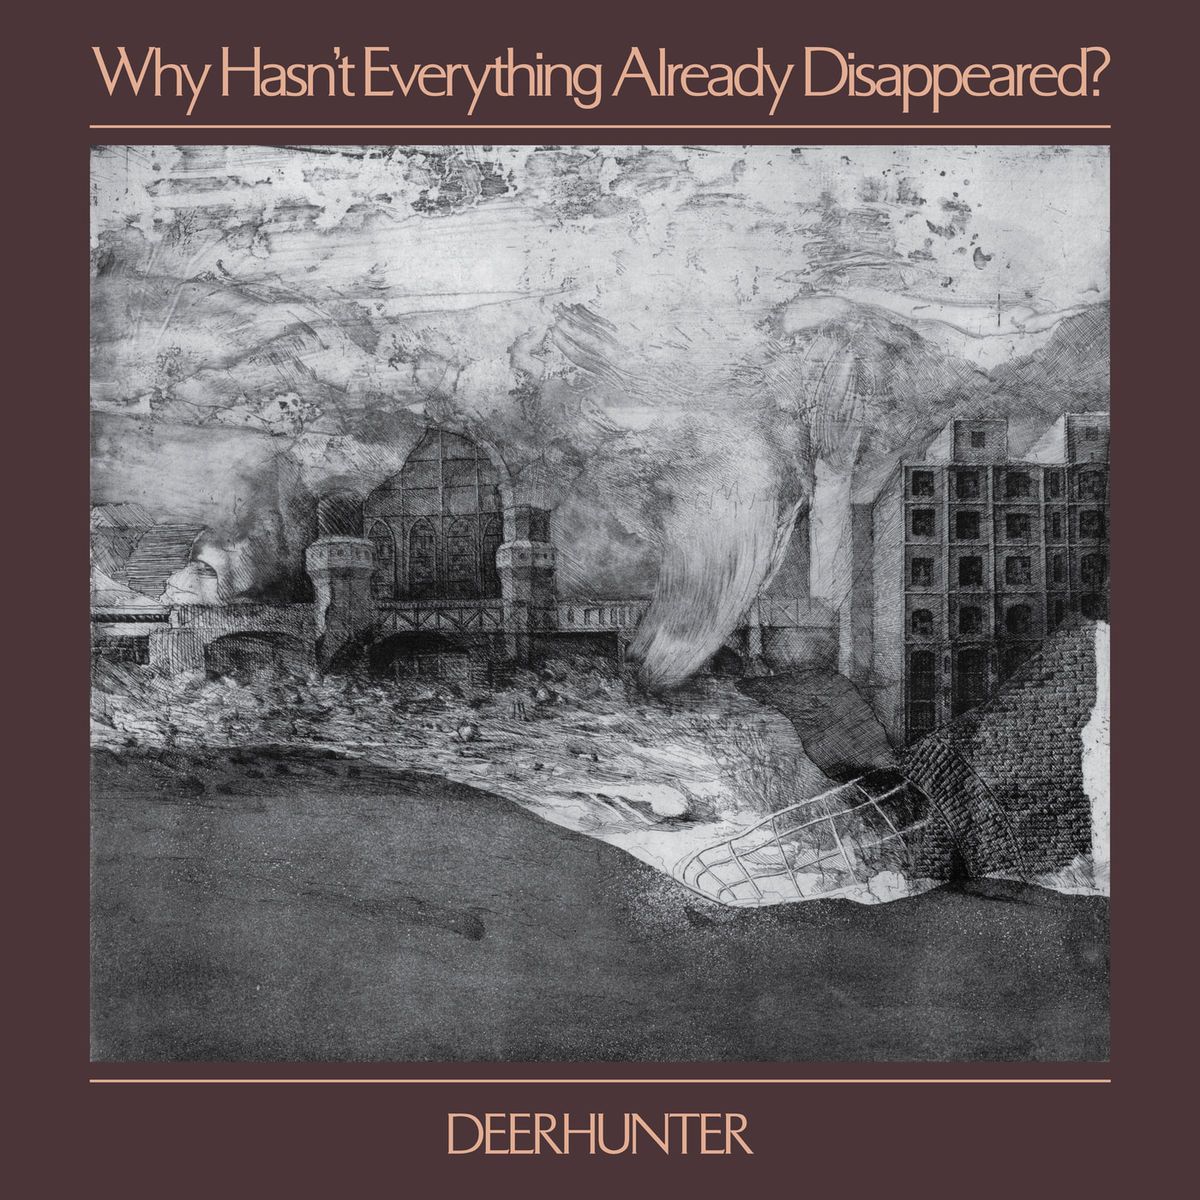 Deerhunter "Why Hasn't Everything Already Disappeared?" CD